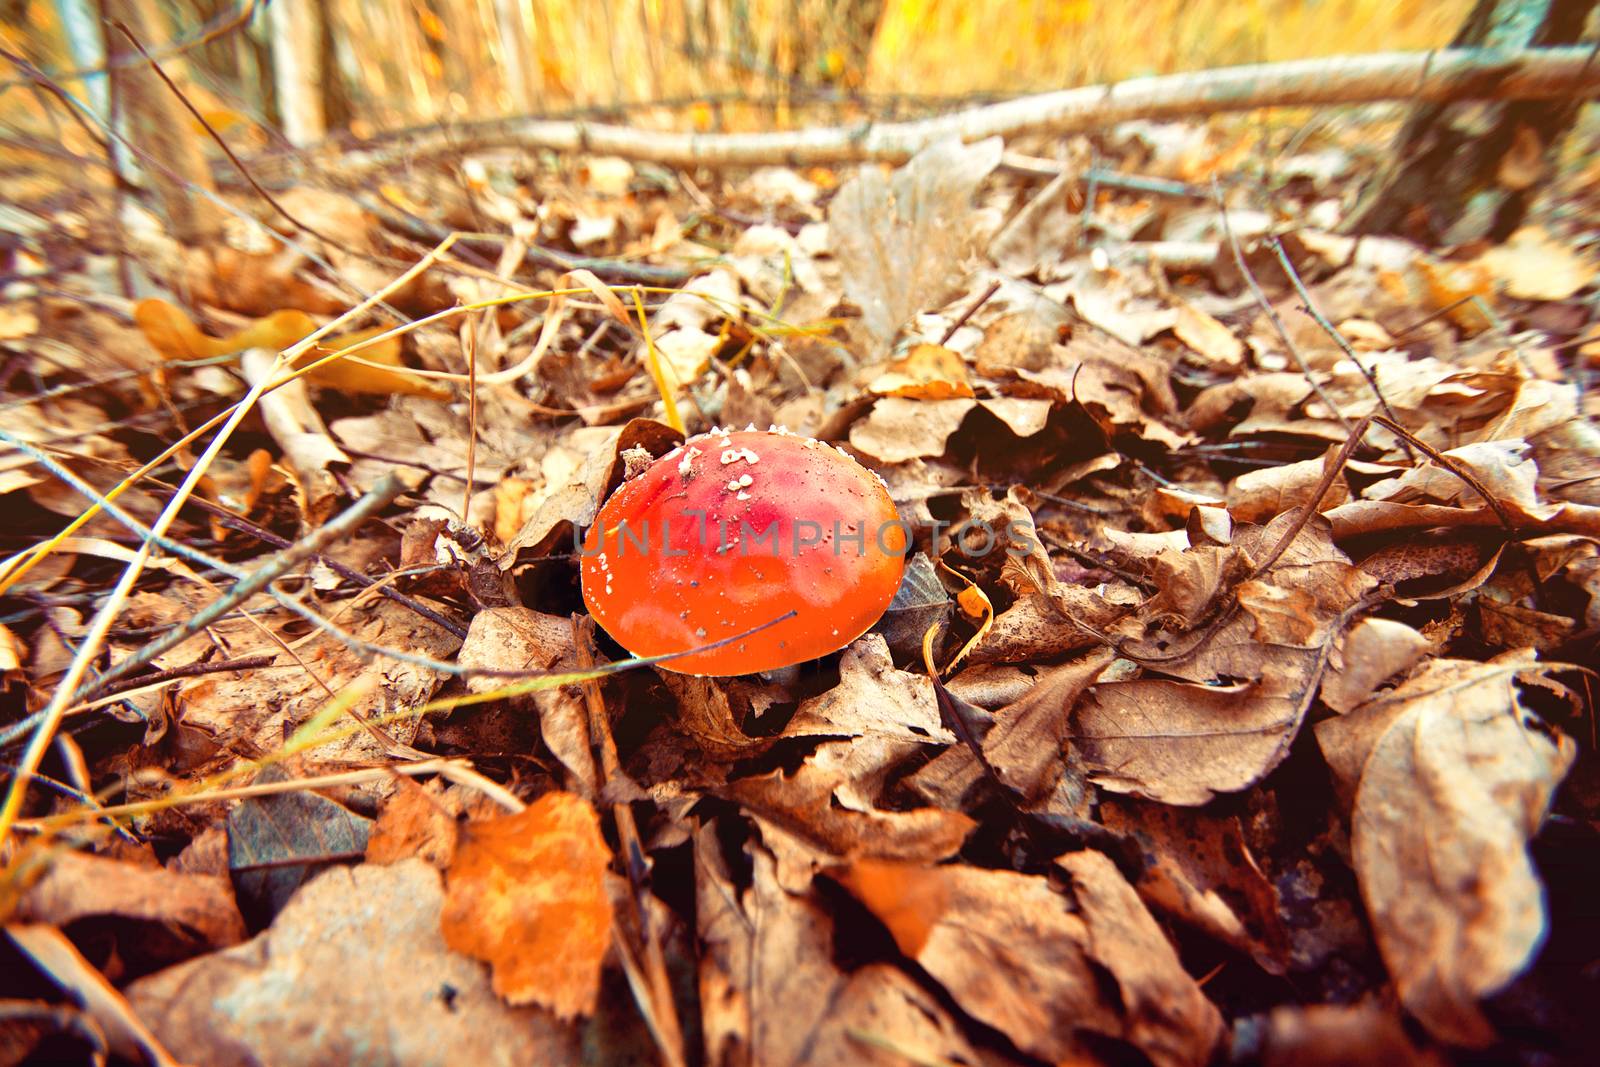 Toadstool between leaves in the forest at autumn.